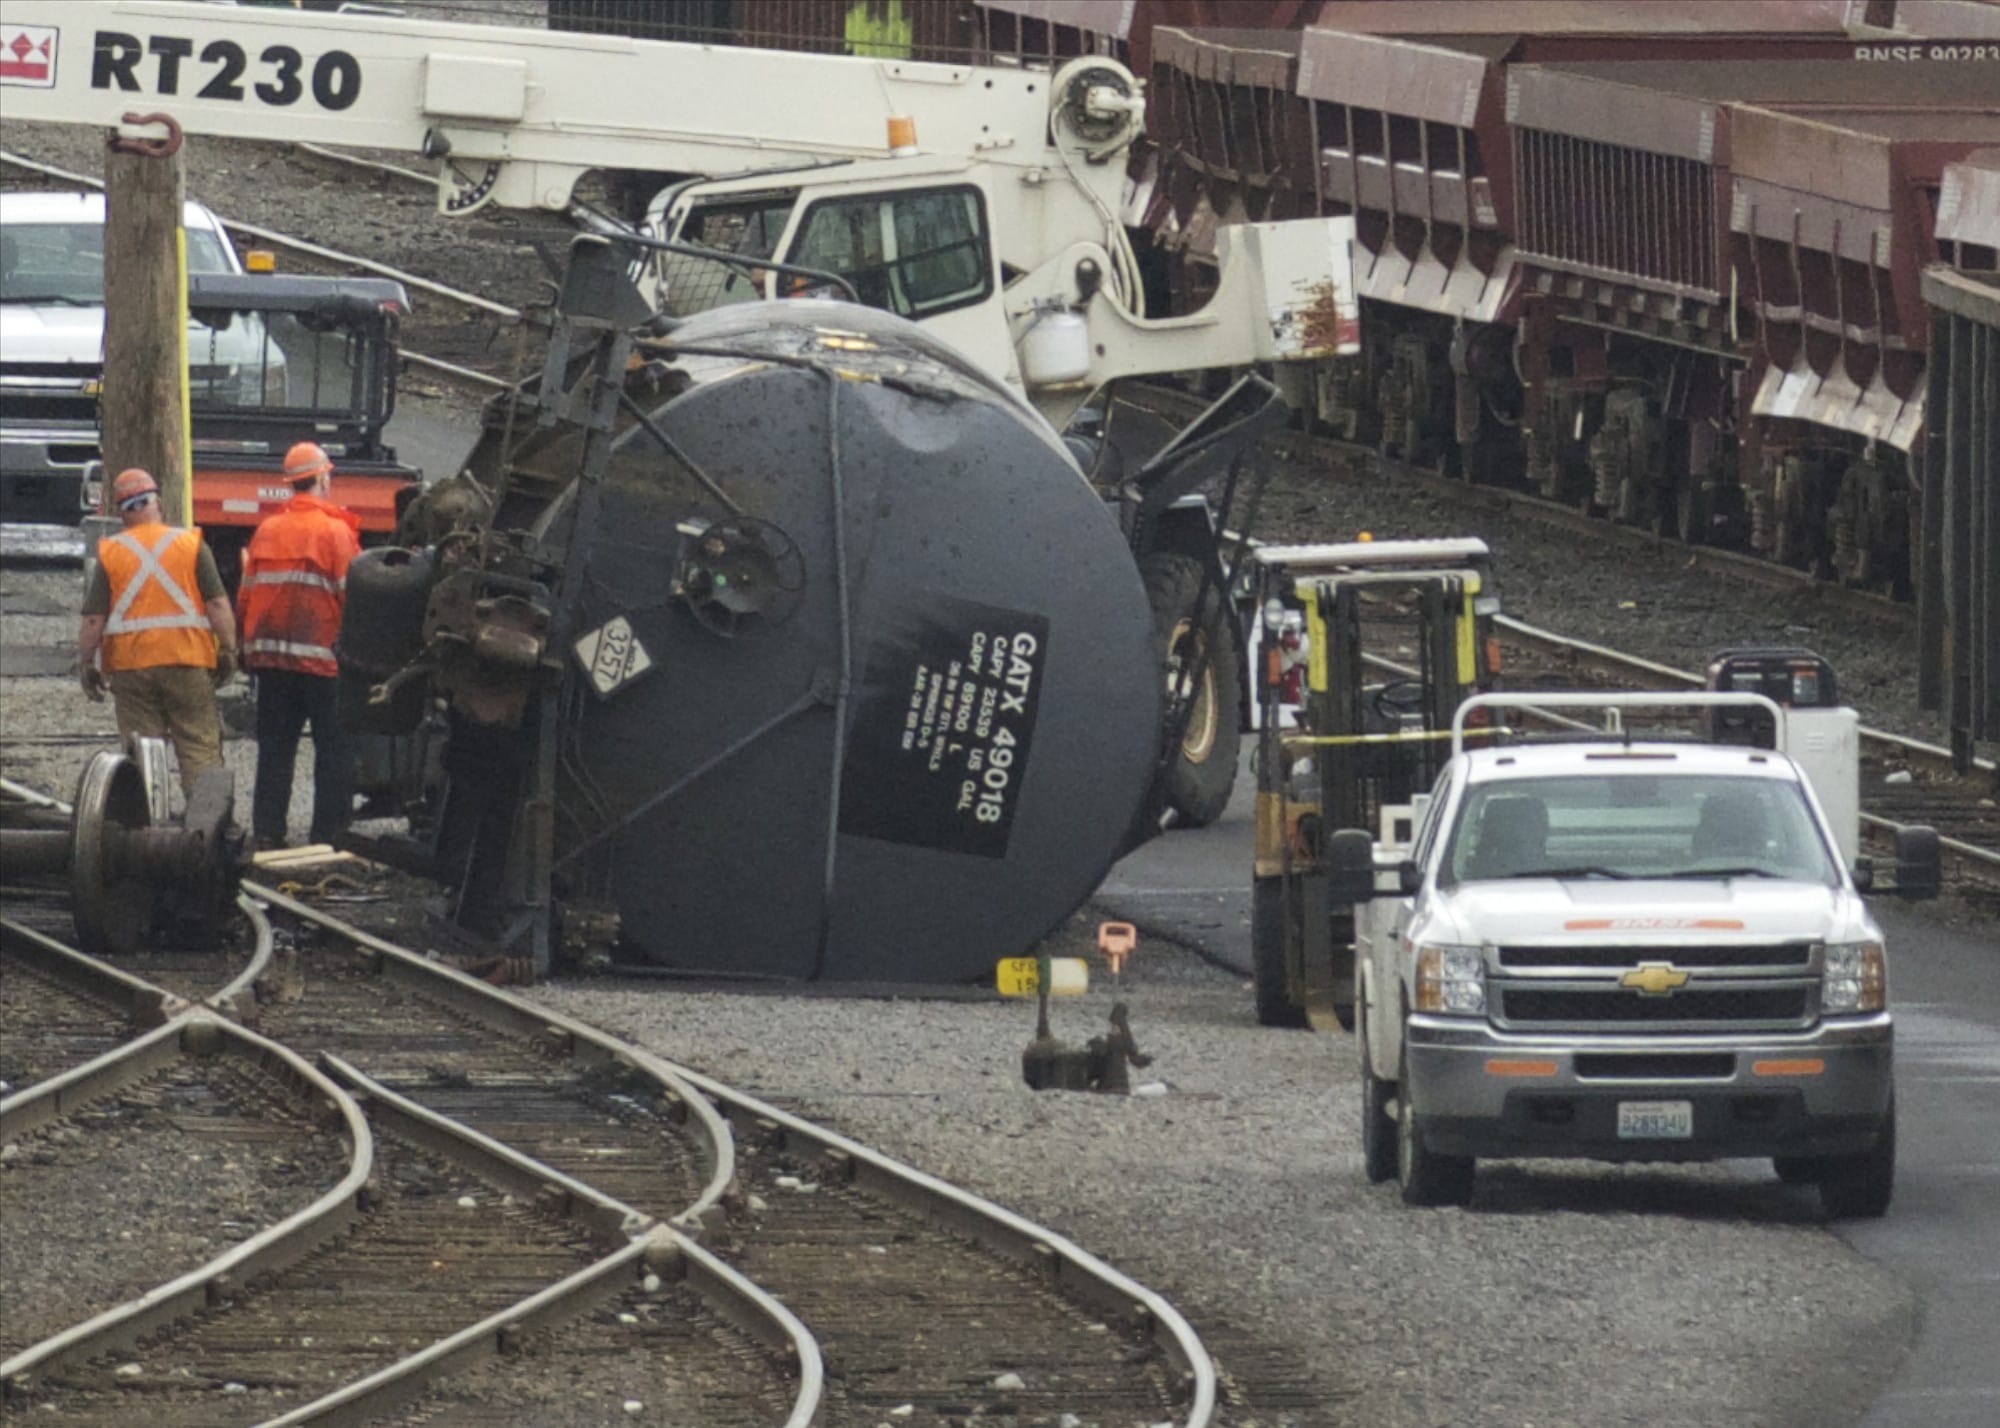 Columbian files
Crews work to right a derailed tank car containing liquid asphalt in BNSF Railway's Vancouver yard near the Fourth Plain Boulevard overpass on June 27, 2014. It was one of 33 reportable incidents in Clark County in a decade.